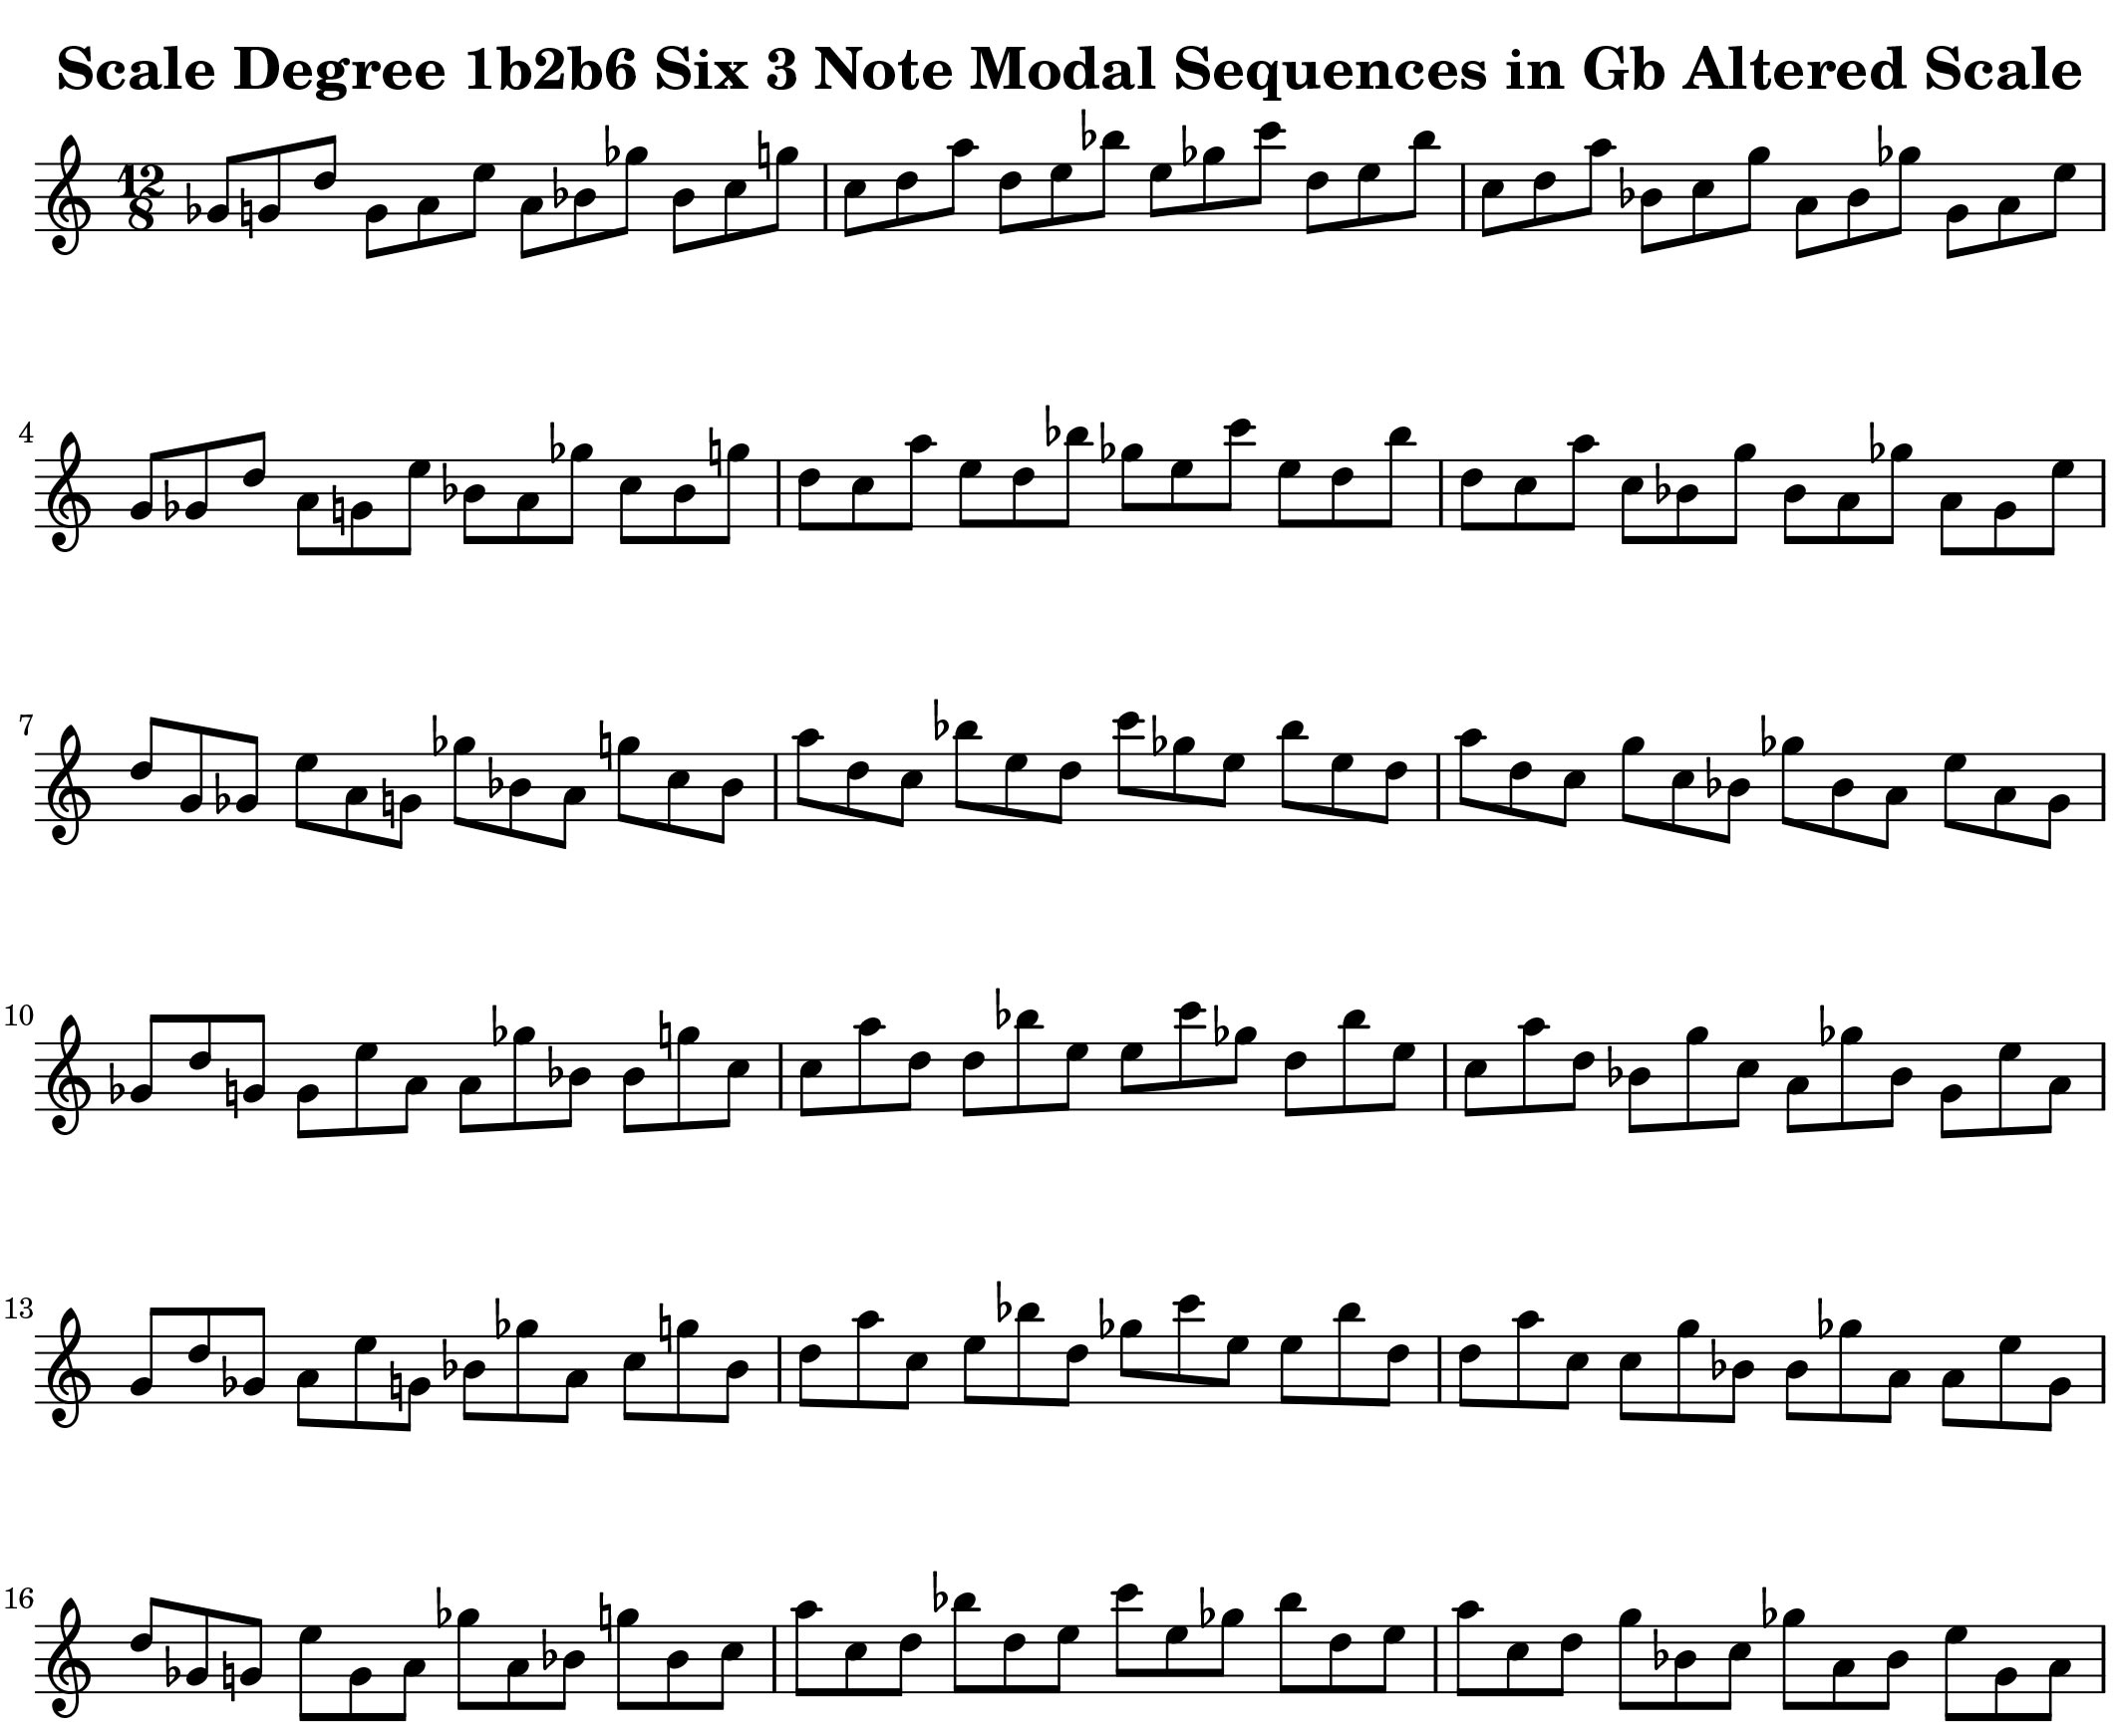 Gb Altered Scale Modal Sequencing 3 Note Group 2 for all instrumentalist by Bruce Arnold for Muse Eek Publishing Company